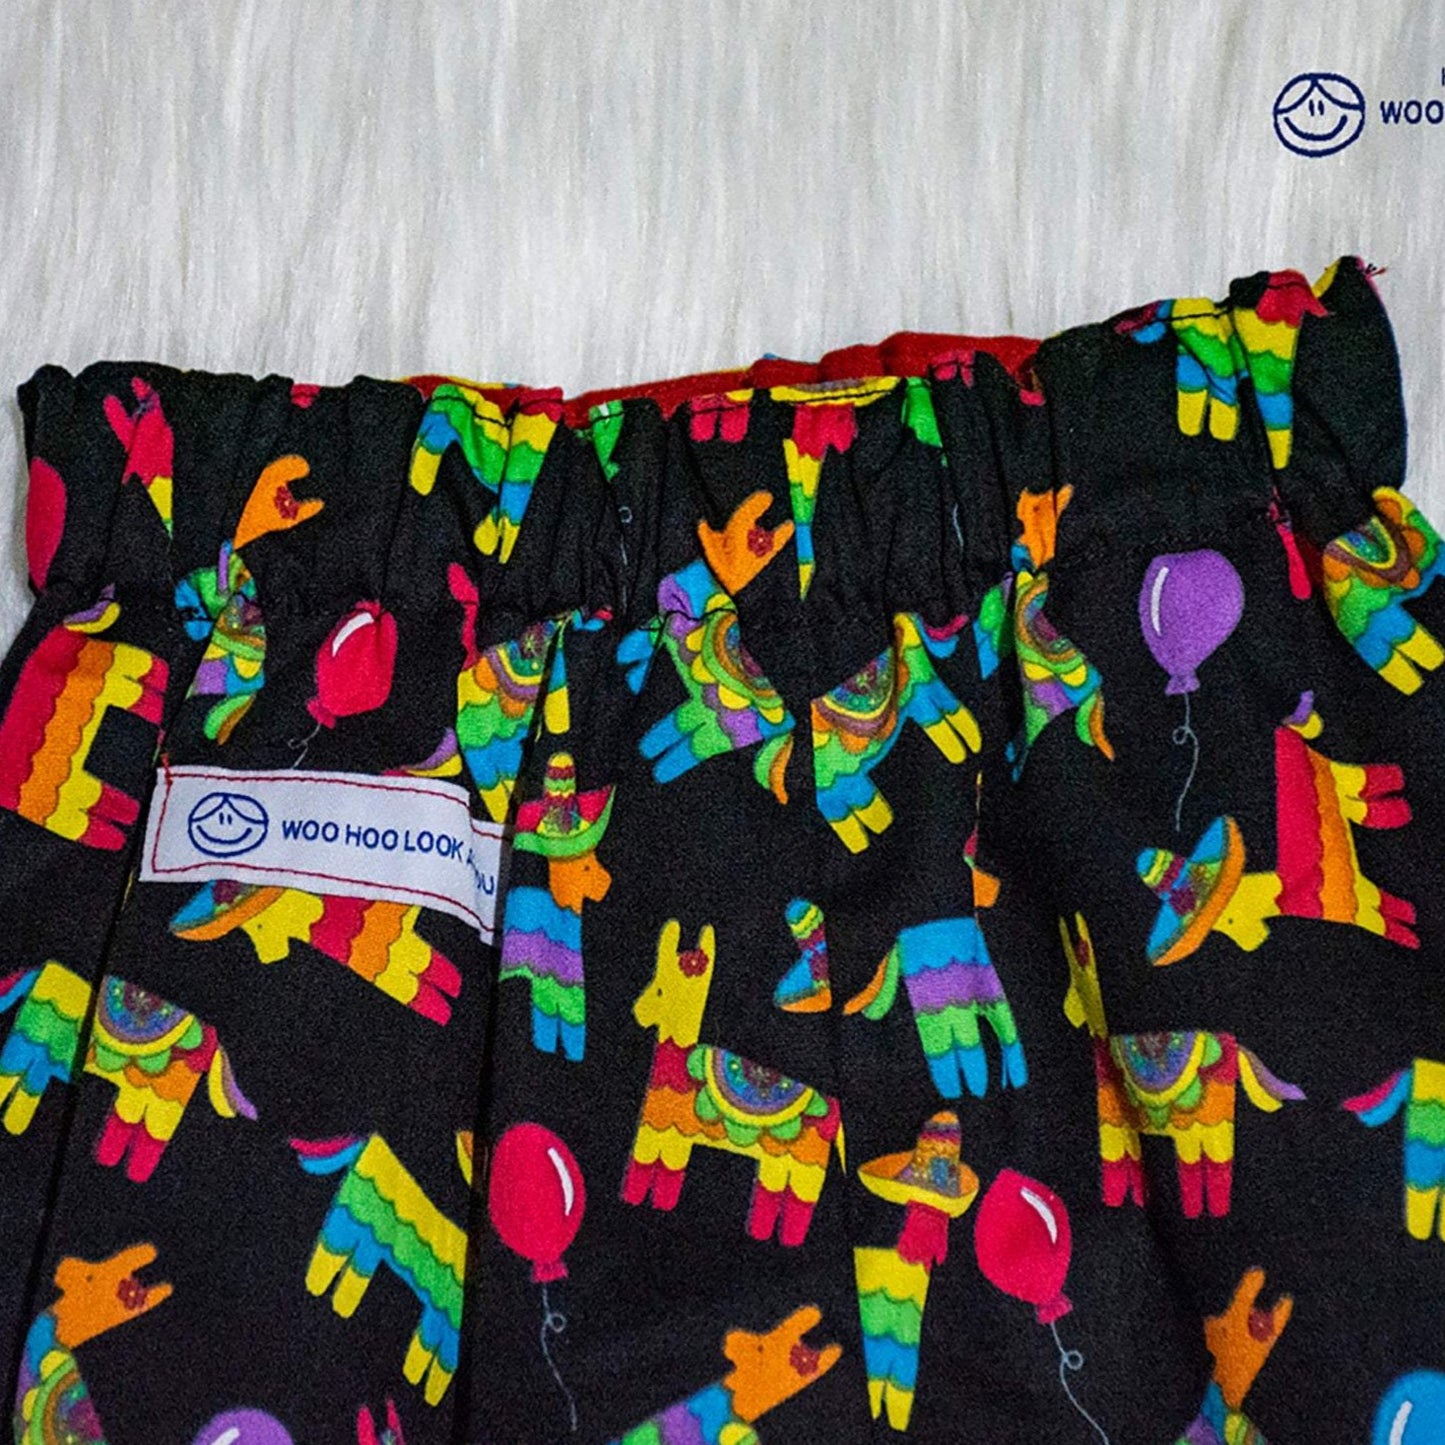 Pants - Cotton - Lined - Llamas with Hats and Red Trim